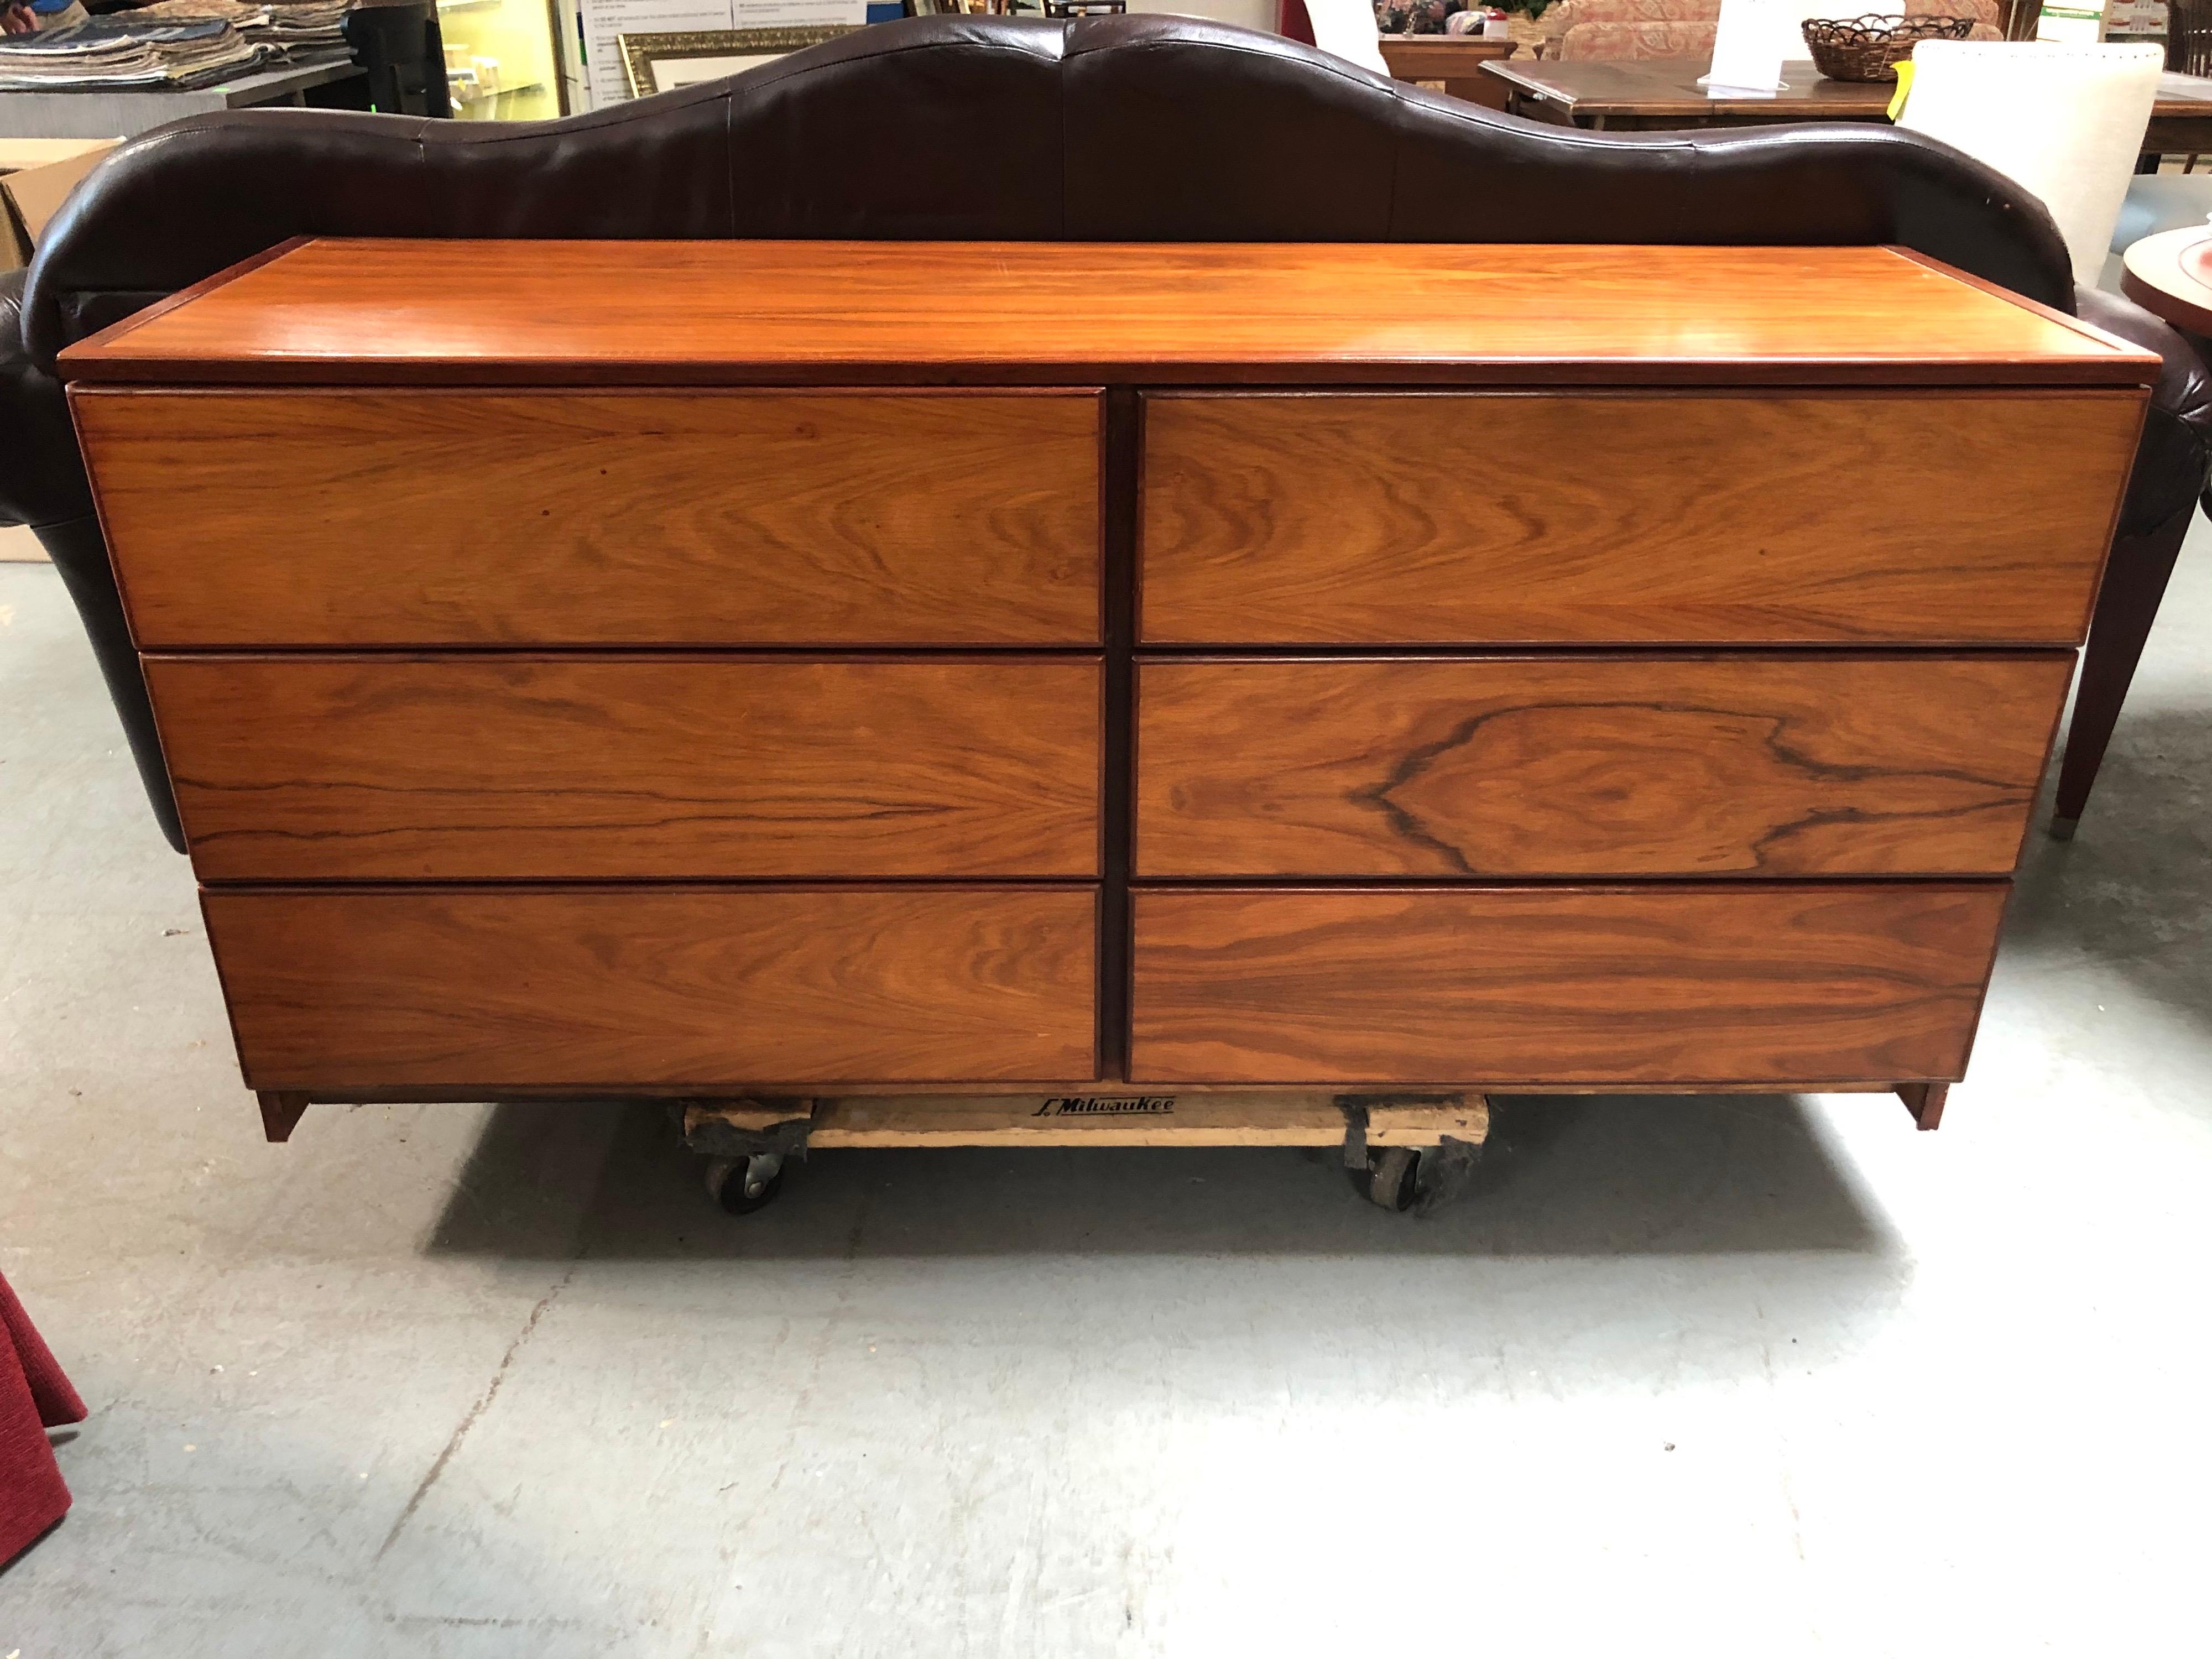 Mid Century Modern Six drawer rosewood dresser. Ample storage with a minimalist look. This rosewood dresser was custom made and is made from solid wood not a veneer. The drawers are all 6.50